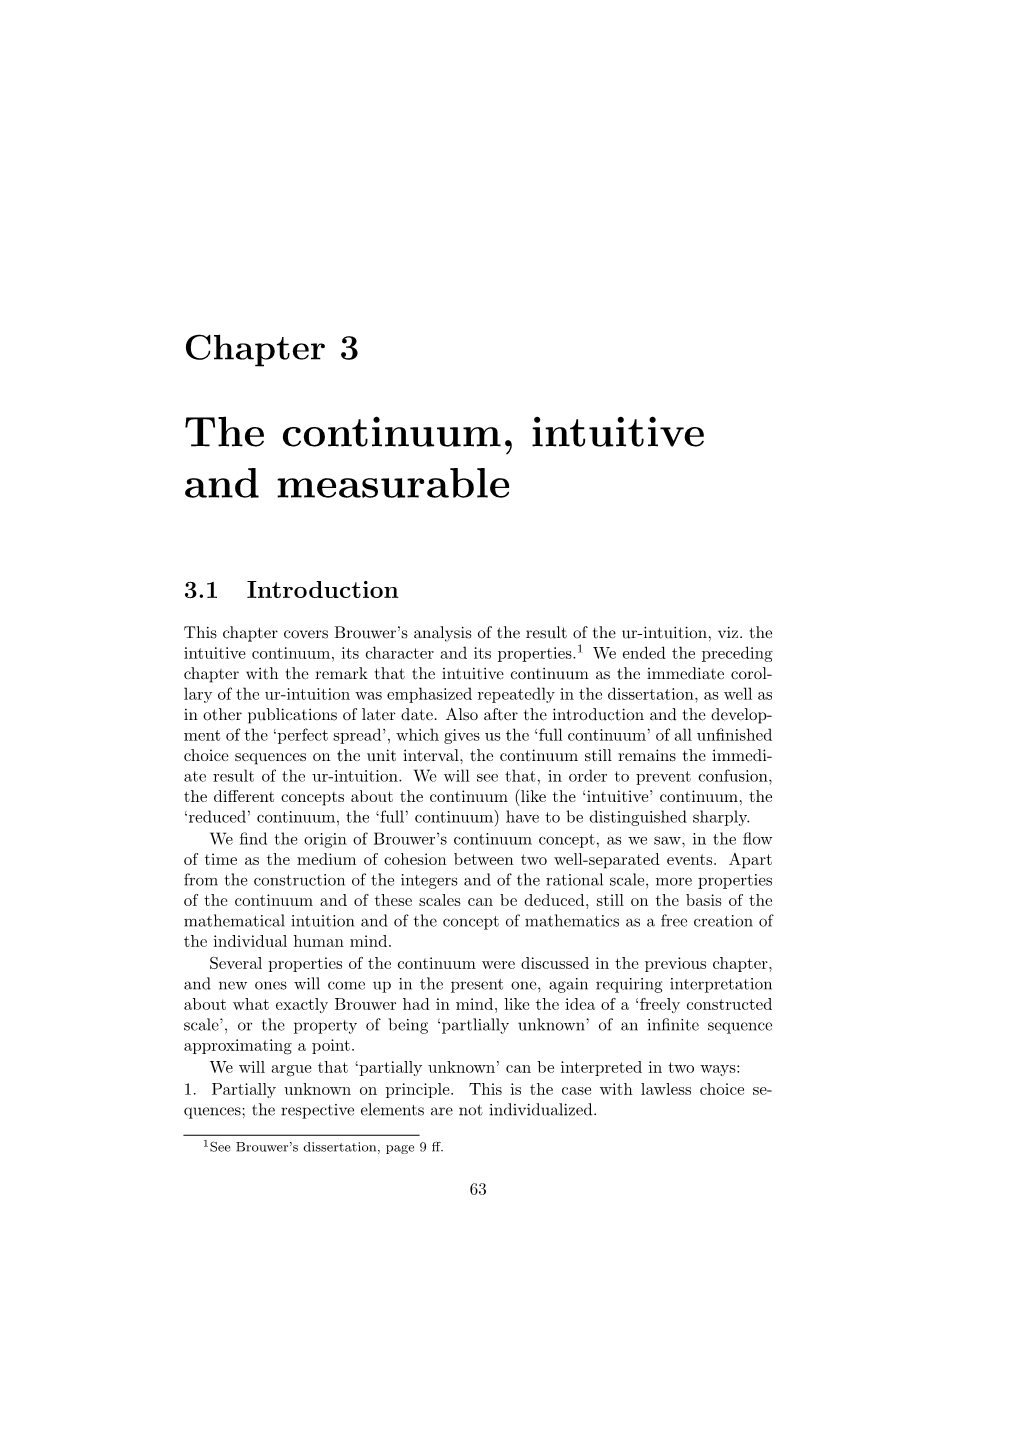 The Continuum, Intuitive and Measurable